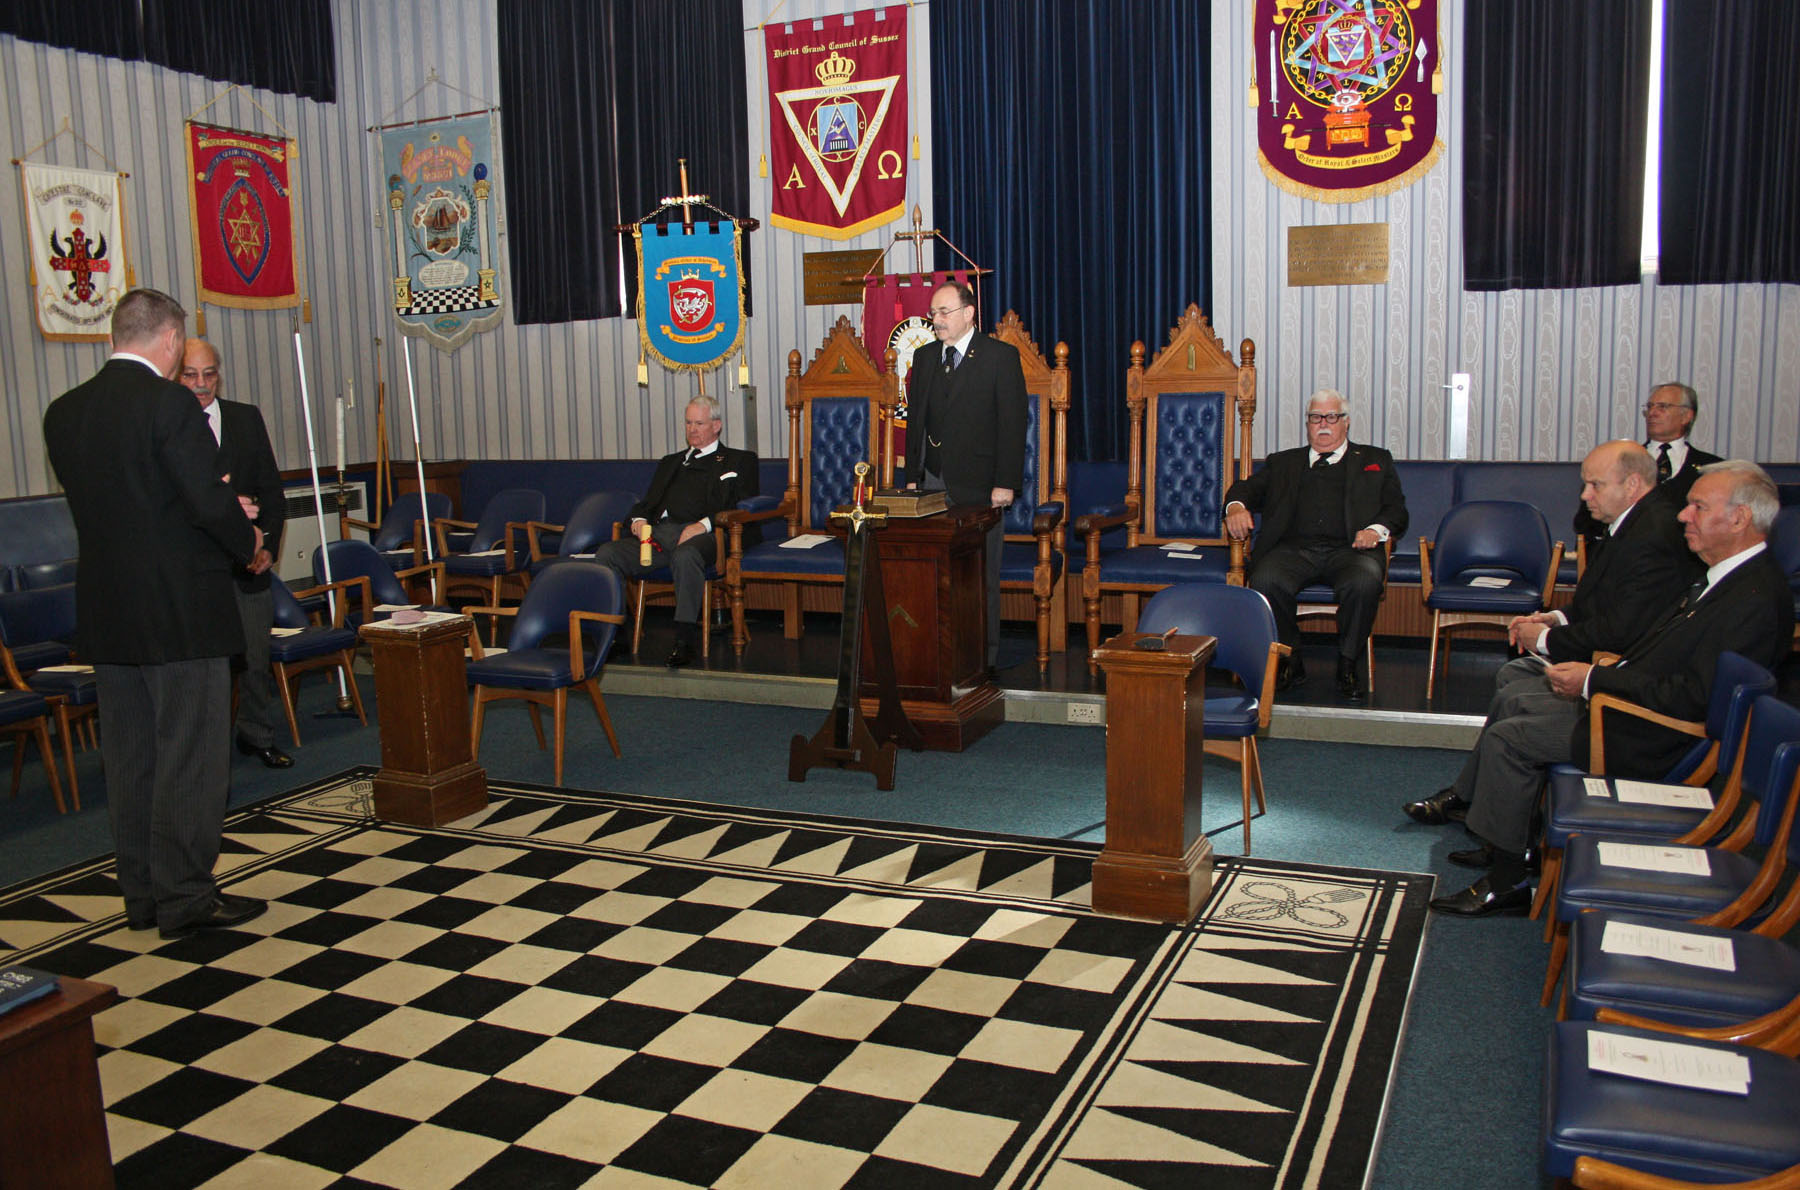 Installation of New Provincial Grand Master and Annual Assembly of Provincial Grand Court